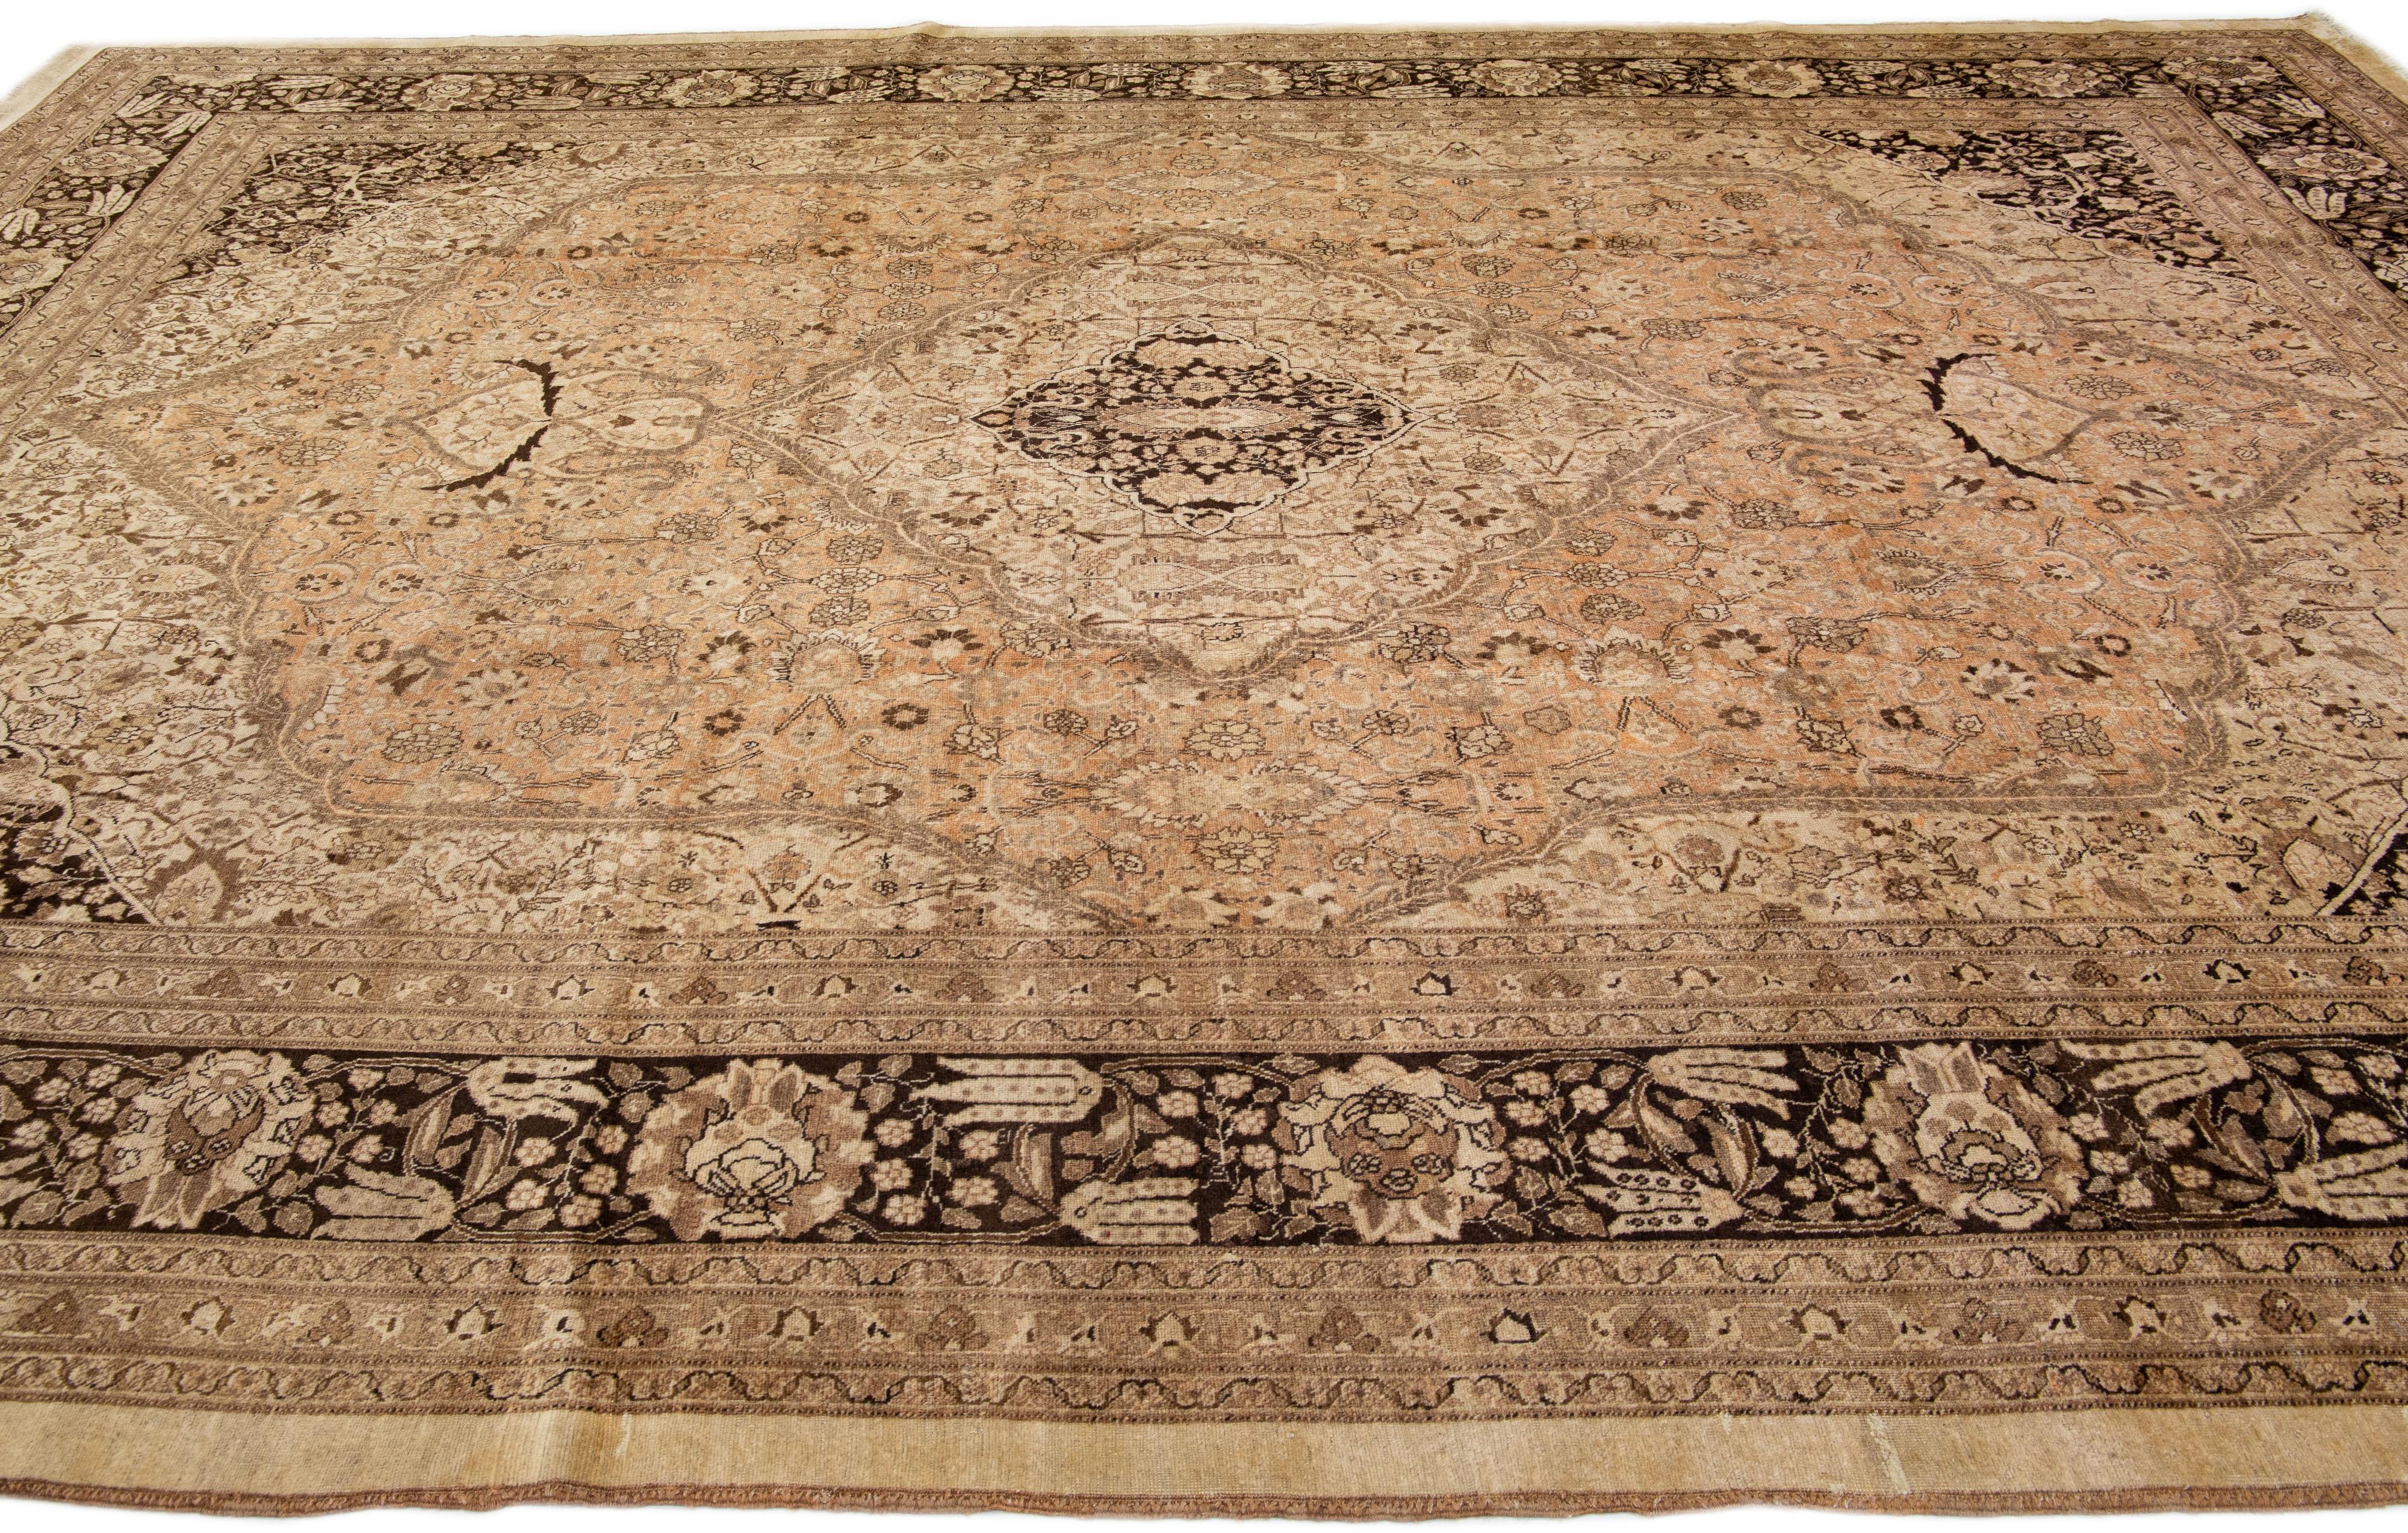 20th Century Antique Tabriz Beige Handmade Oversize Persian Wool Rug with Shah Abbasi Motif For Sale